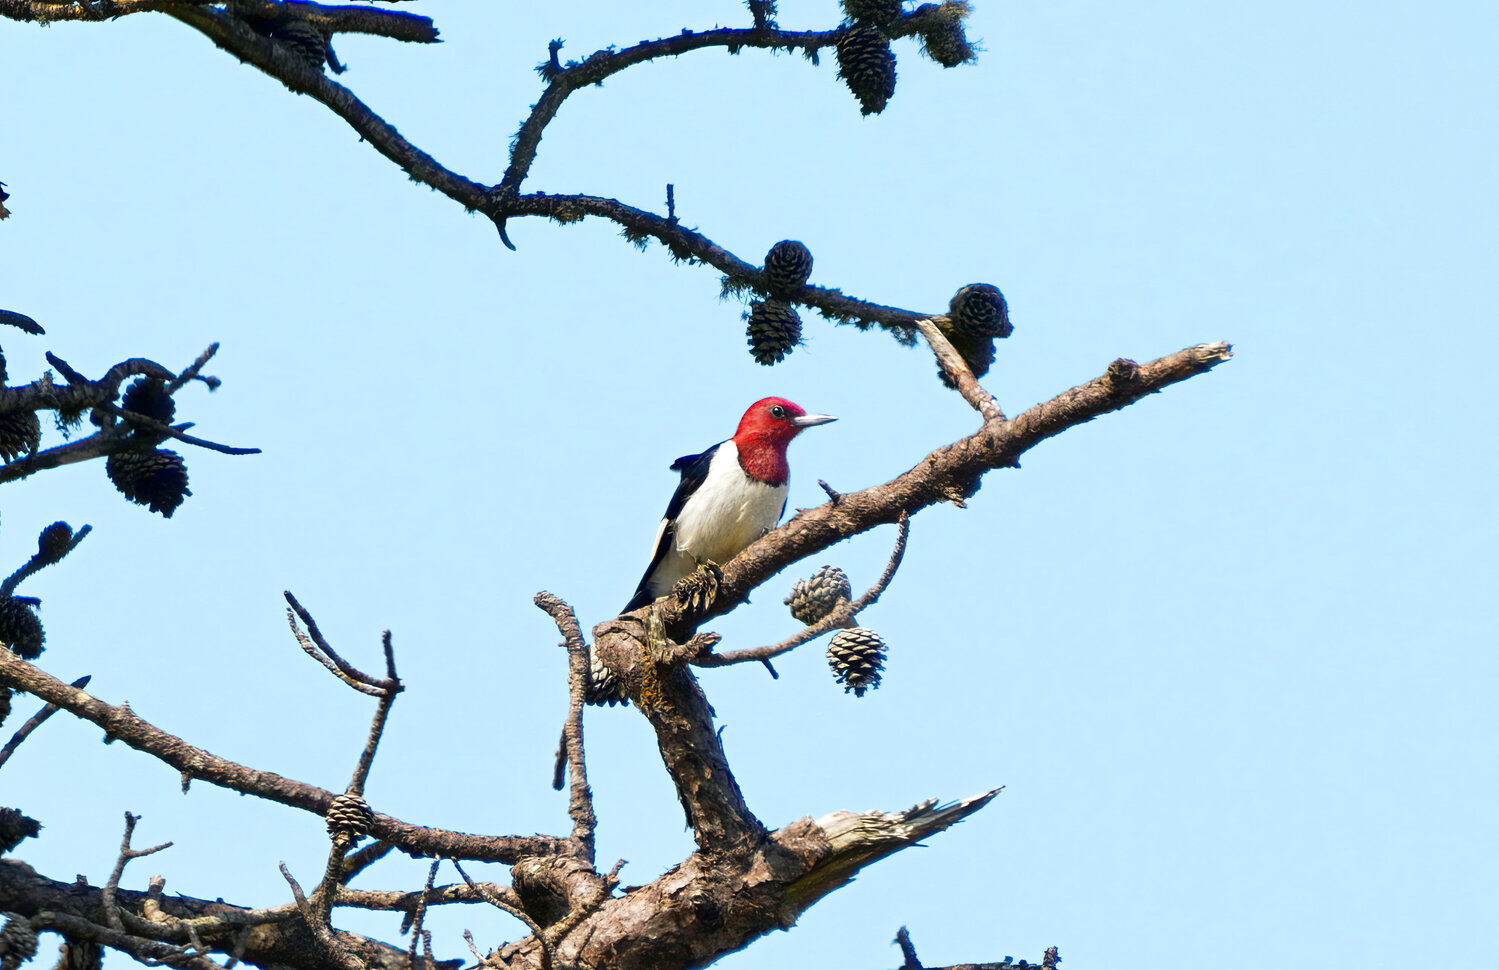 This adult Red-headed Woodpecker was a rare spring sighting in the Madaket moors last week.